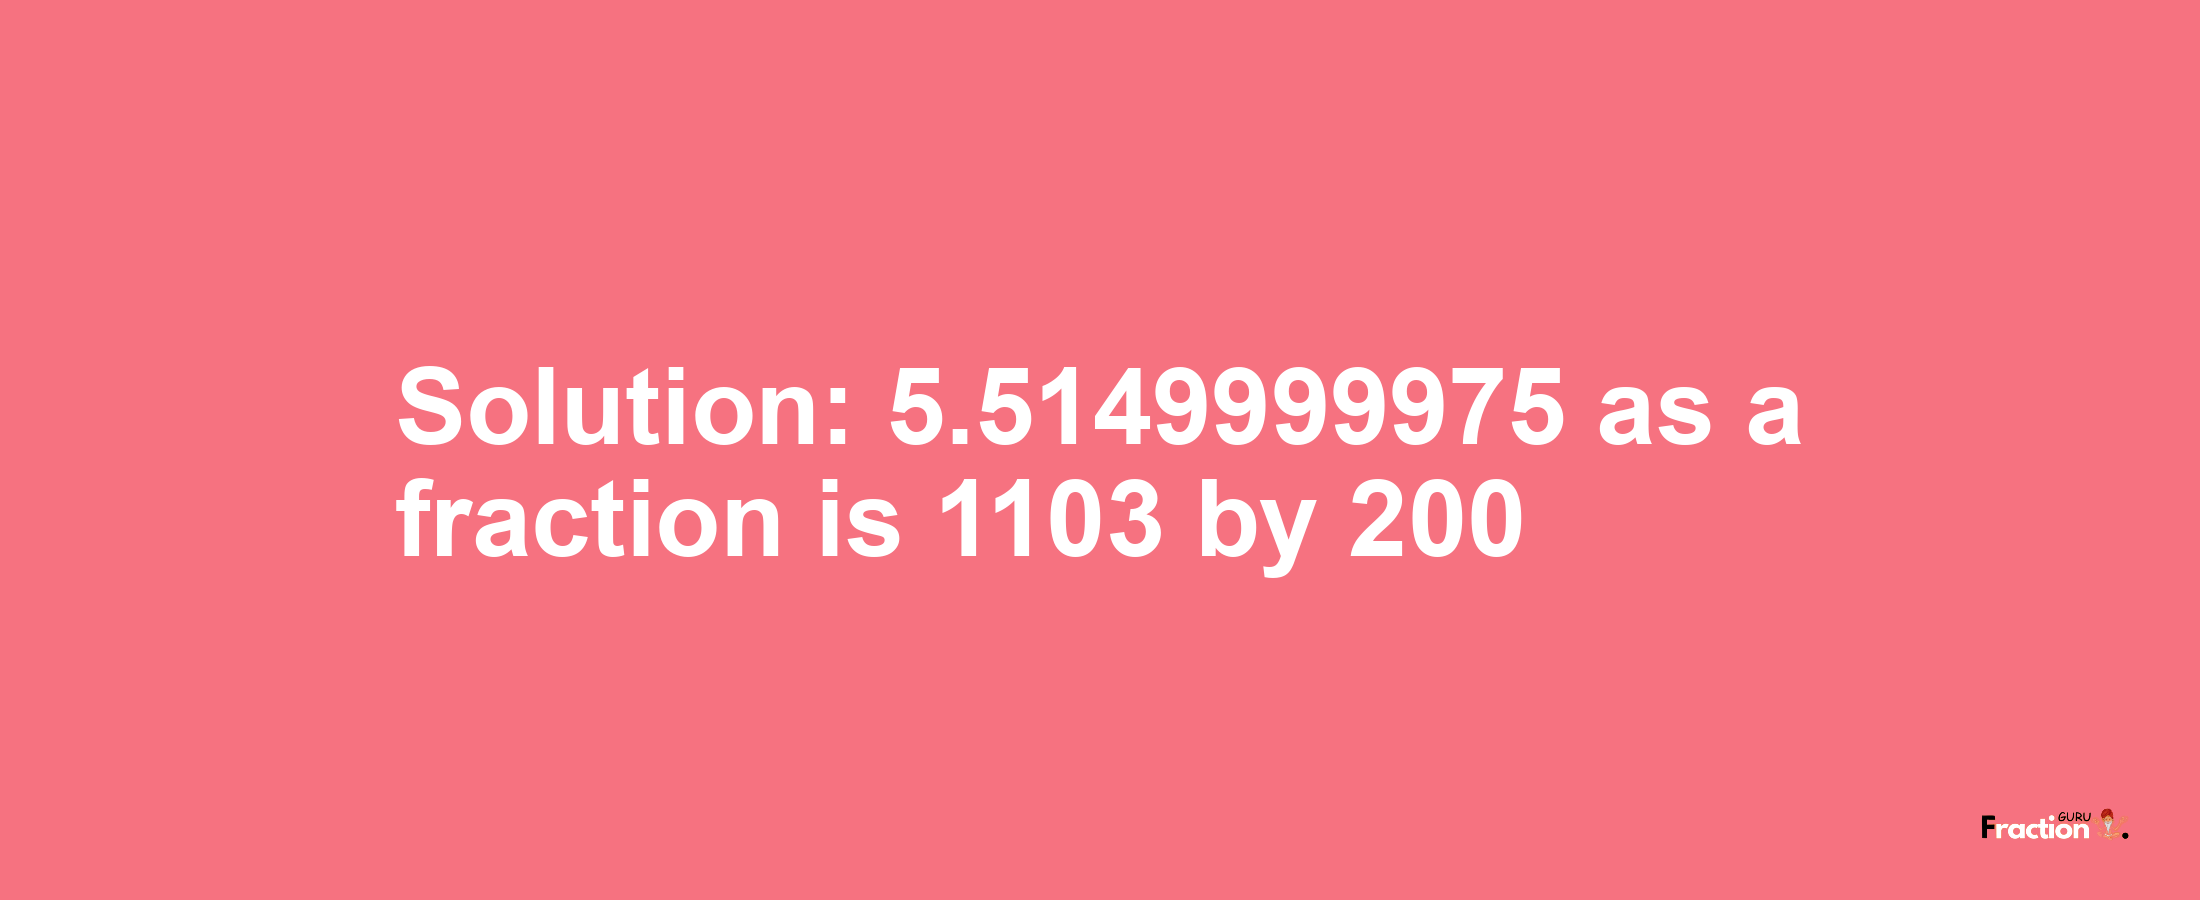 Solution:5.5149999975 as a fraction is 1103/200